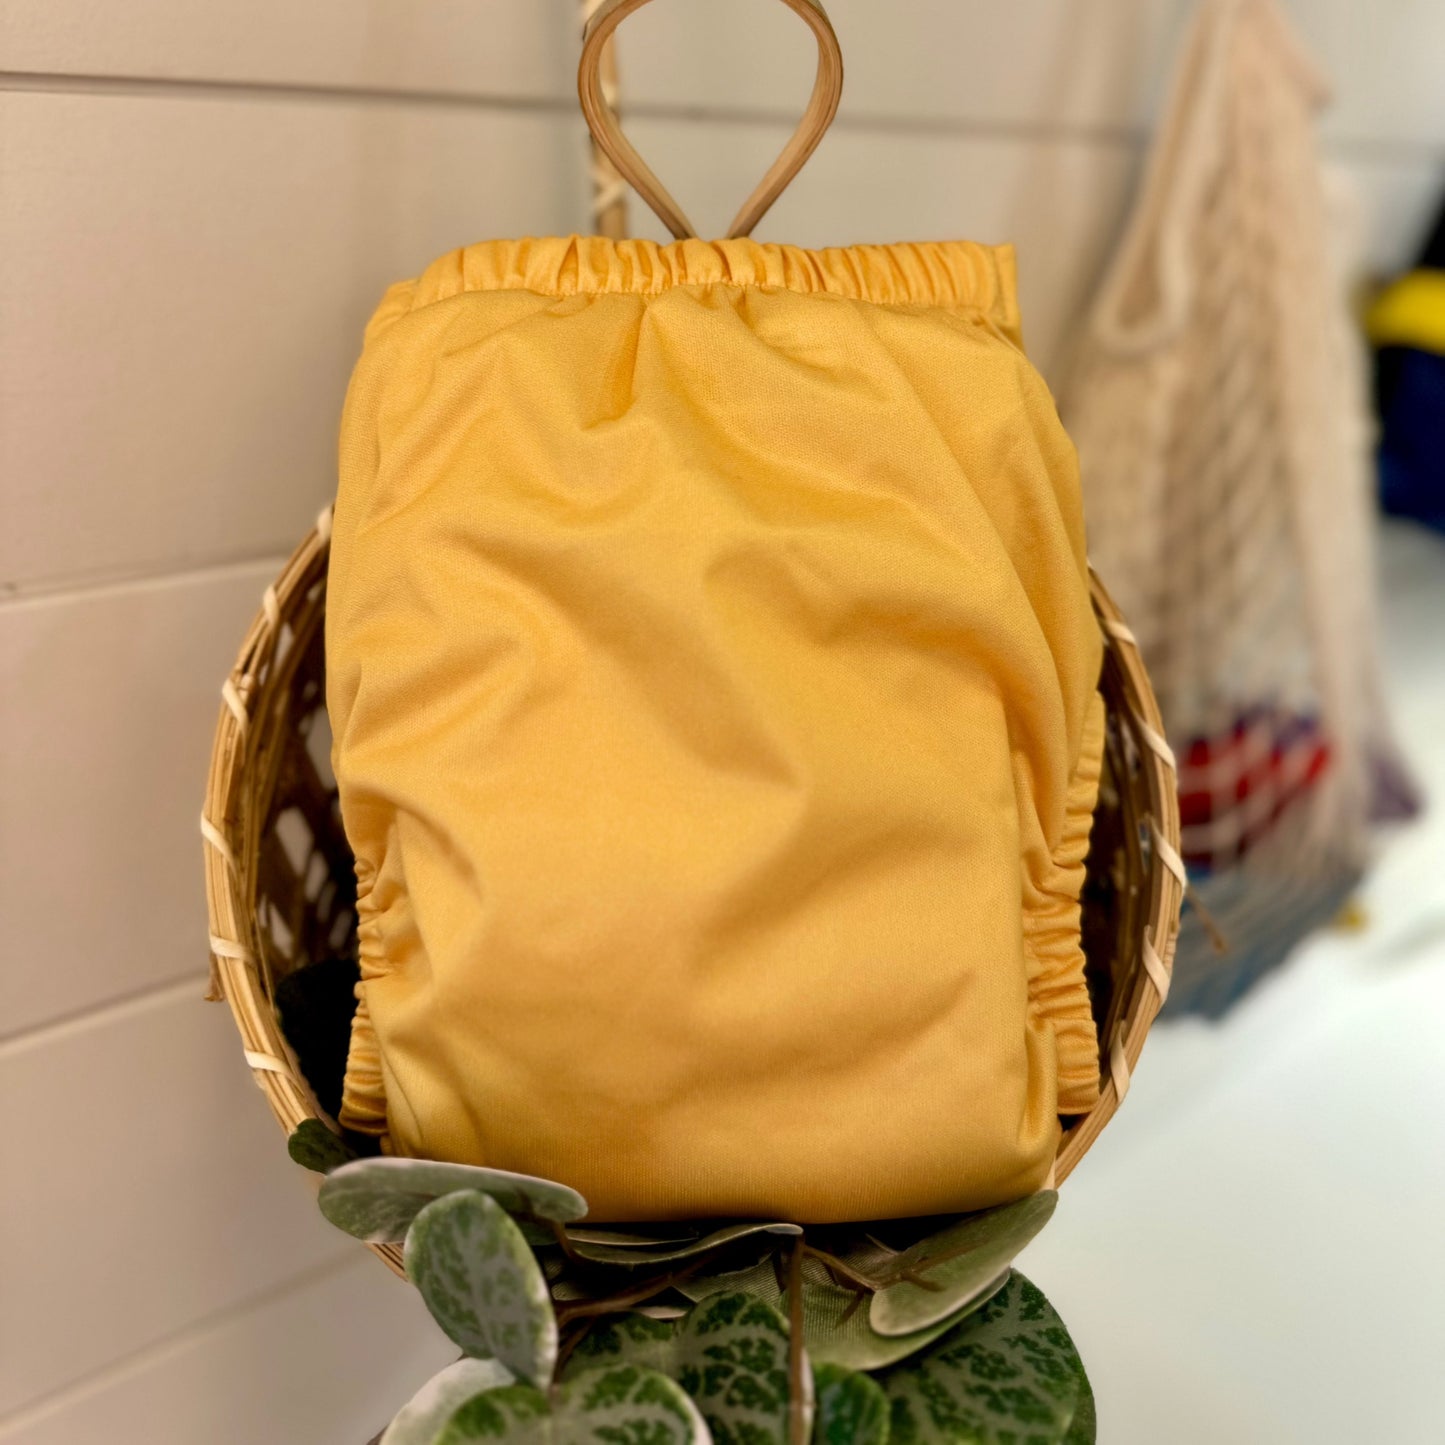 back of yellow cloth diaper in a basket